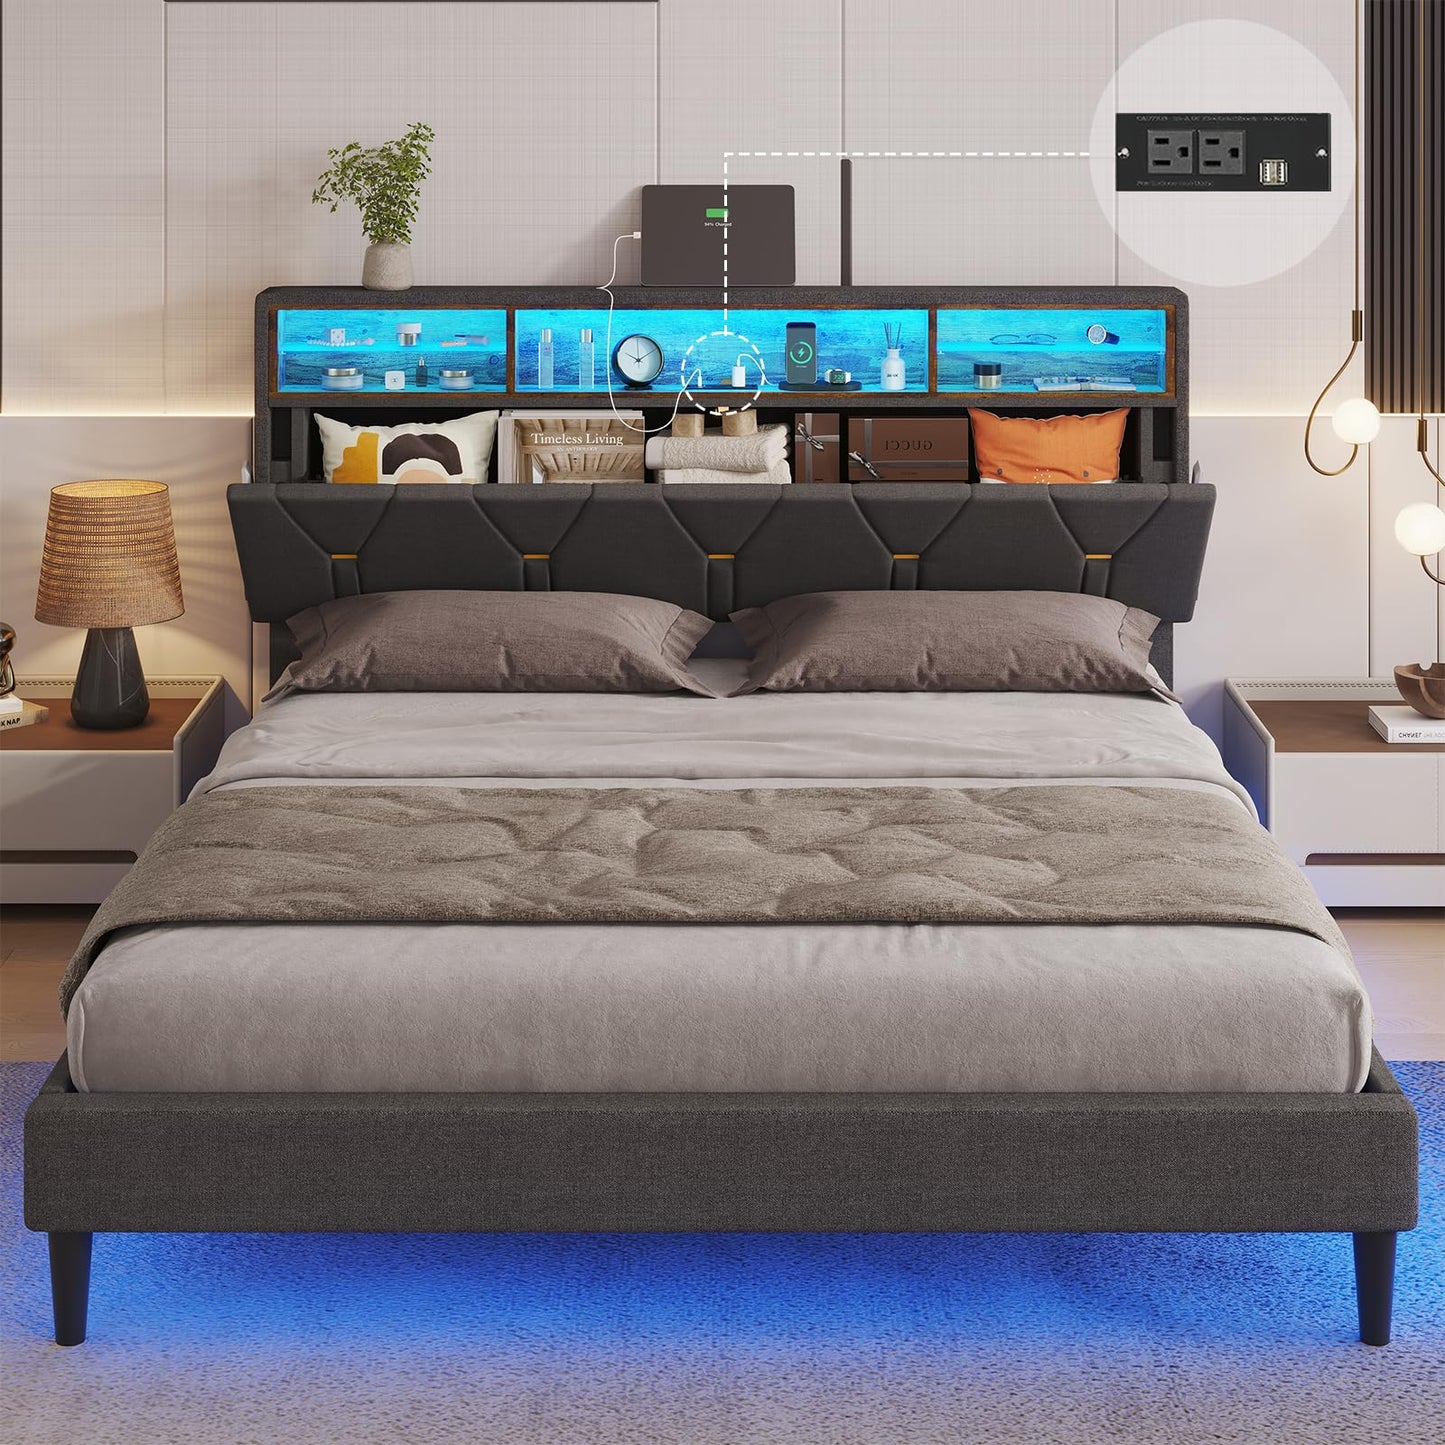 ADORNEVE Queen Bed Frame with USB Ports & Outlets, LED Bed Frame Queen Size with Shelf Storage Headboard, Upholstered Platform Bed with LED Lights, Solid Wood Slats, Stable Structure, Dark Gray